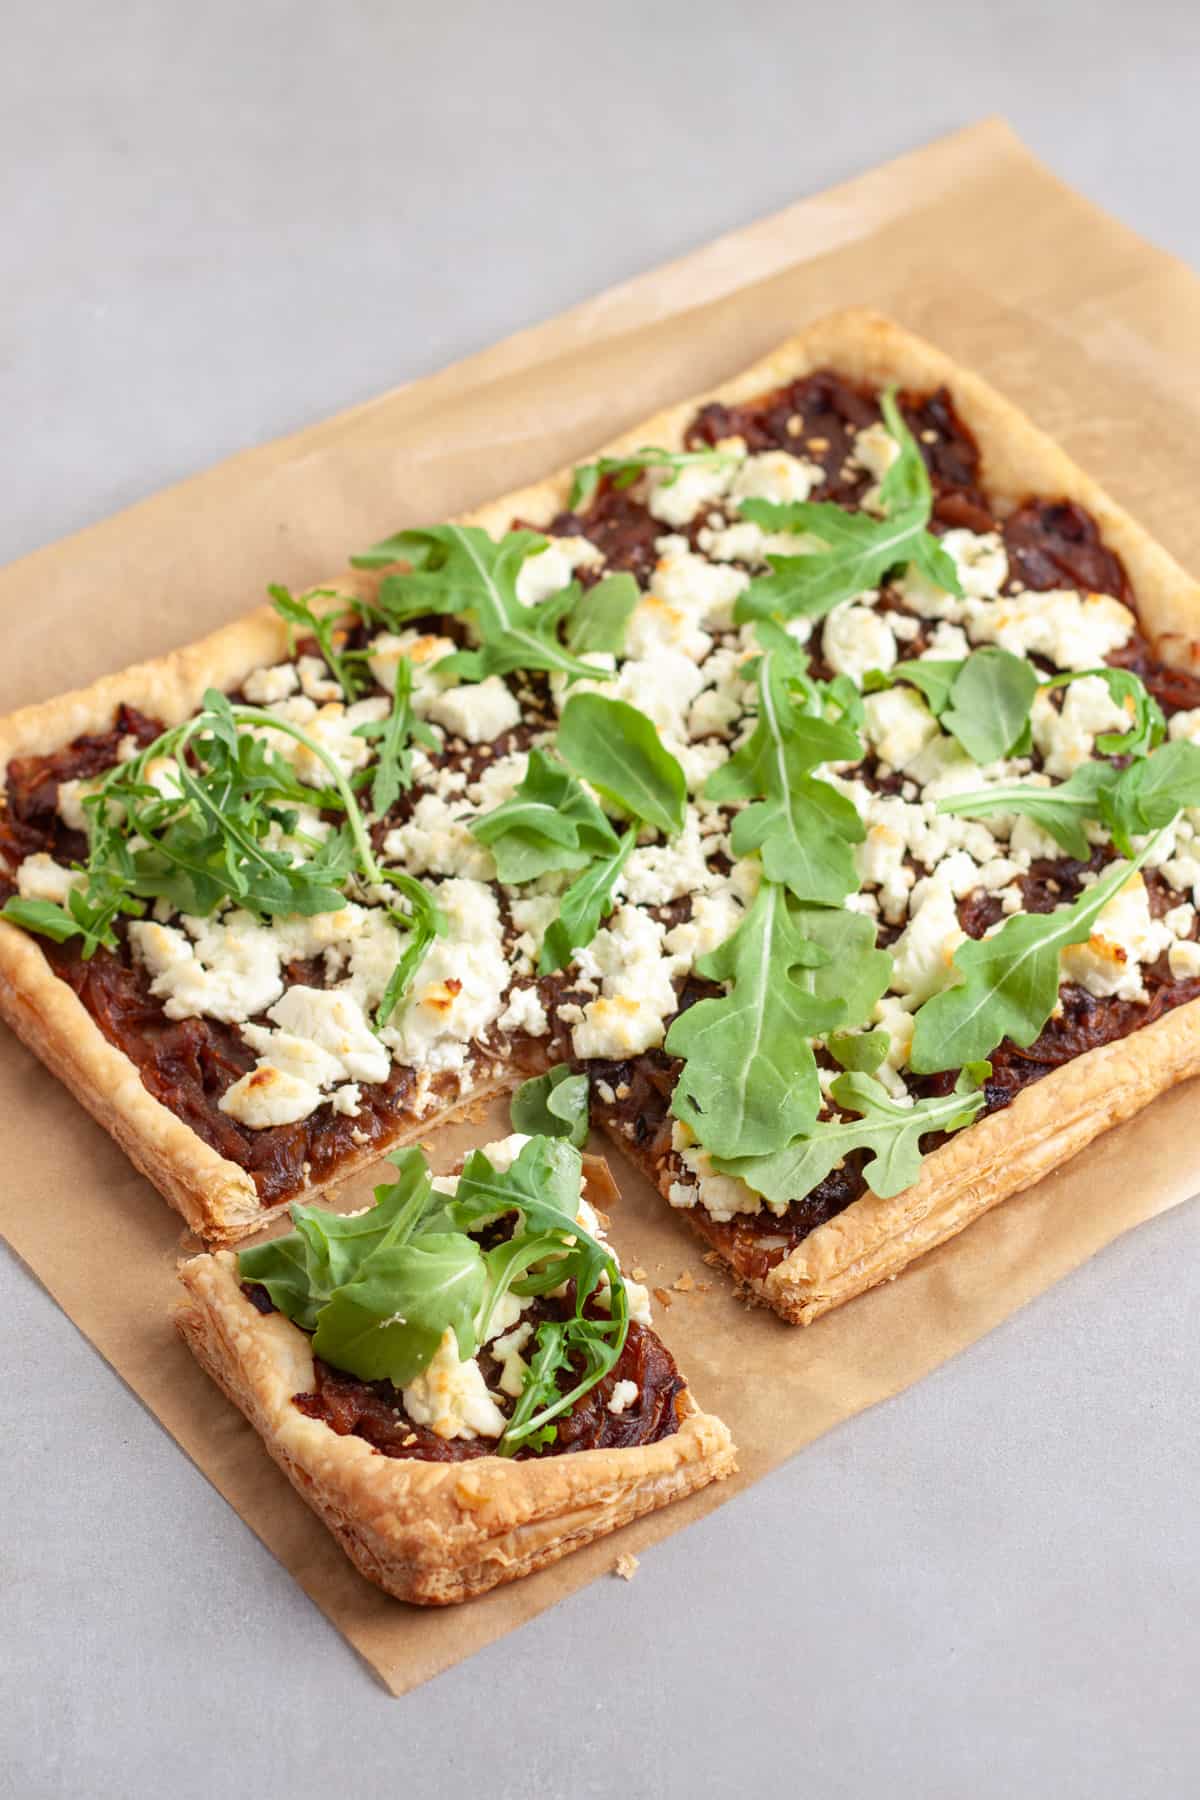 A portion of caramelized onion and goat cheese tart cut out of a larger tart.